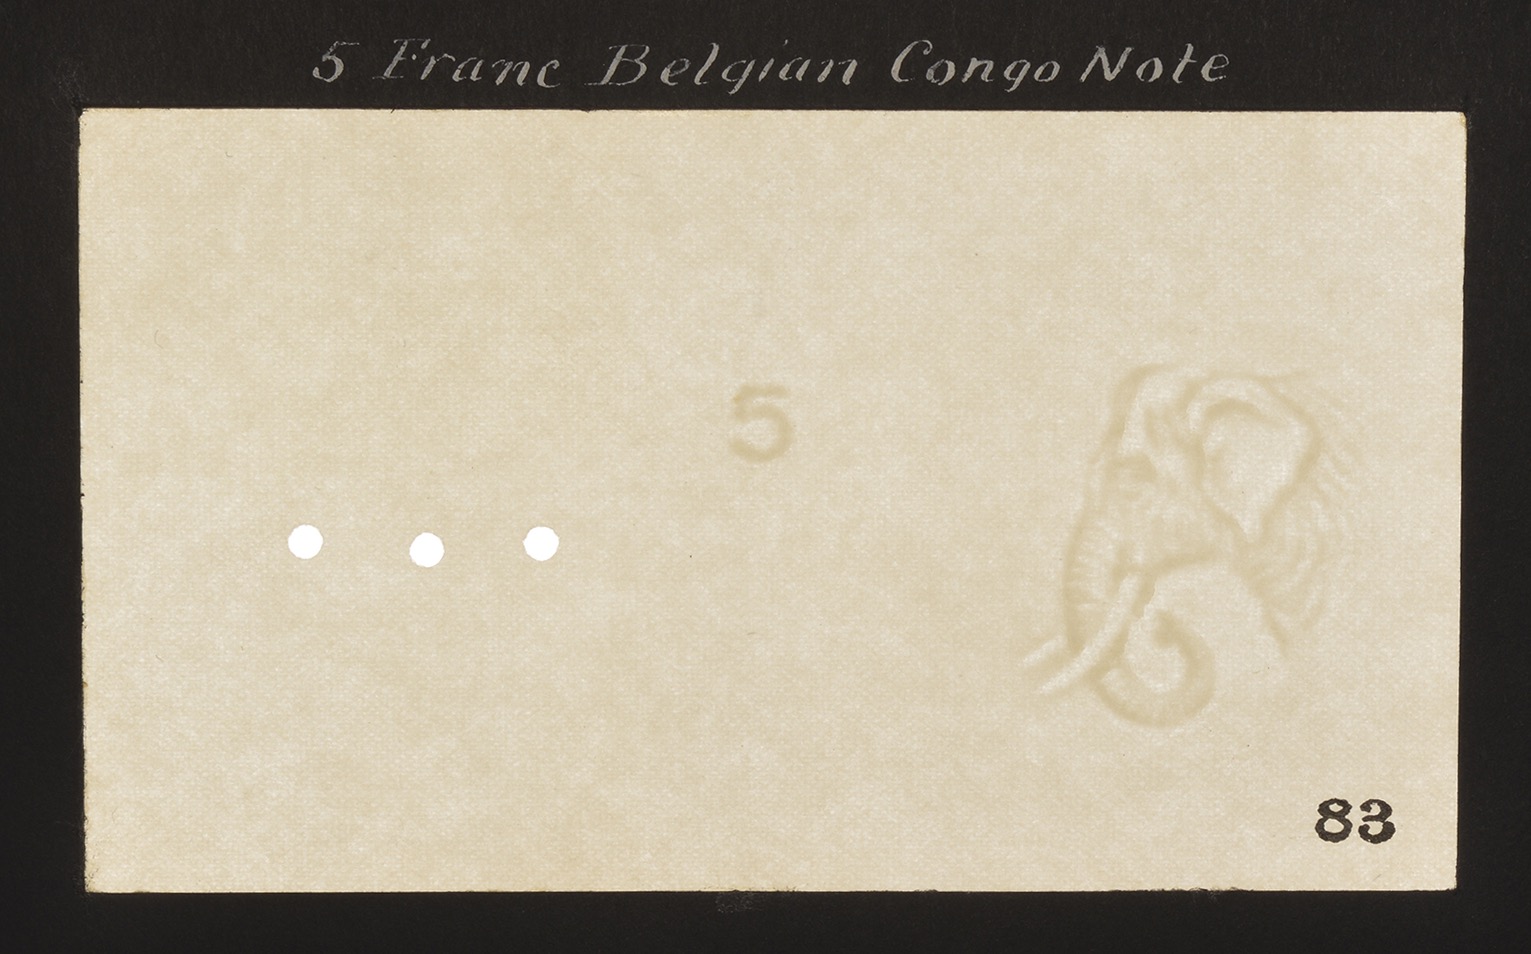 Banque du Congo Belge, watermarked paper (3) as used on the 5 Franc of 1924-30, glued into...